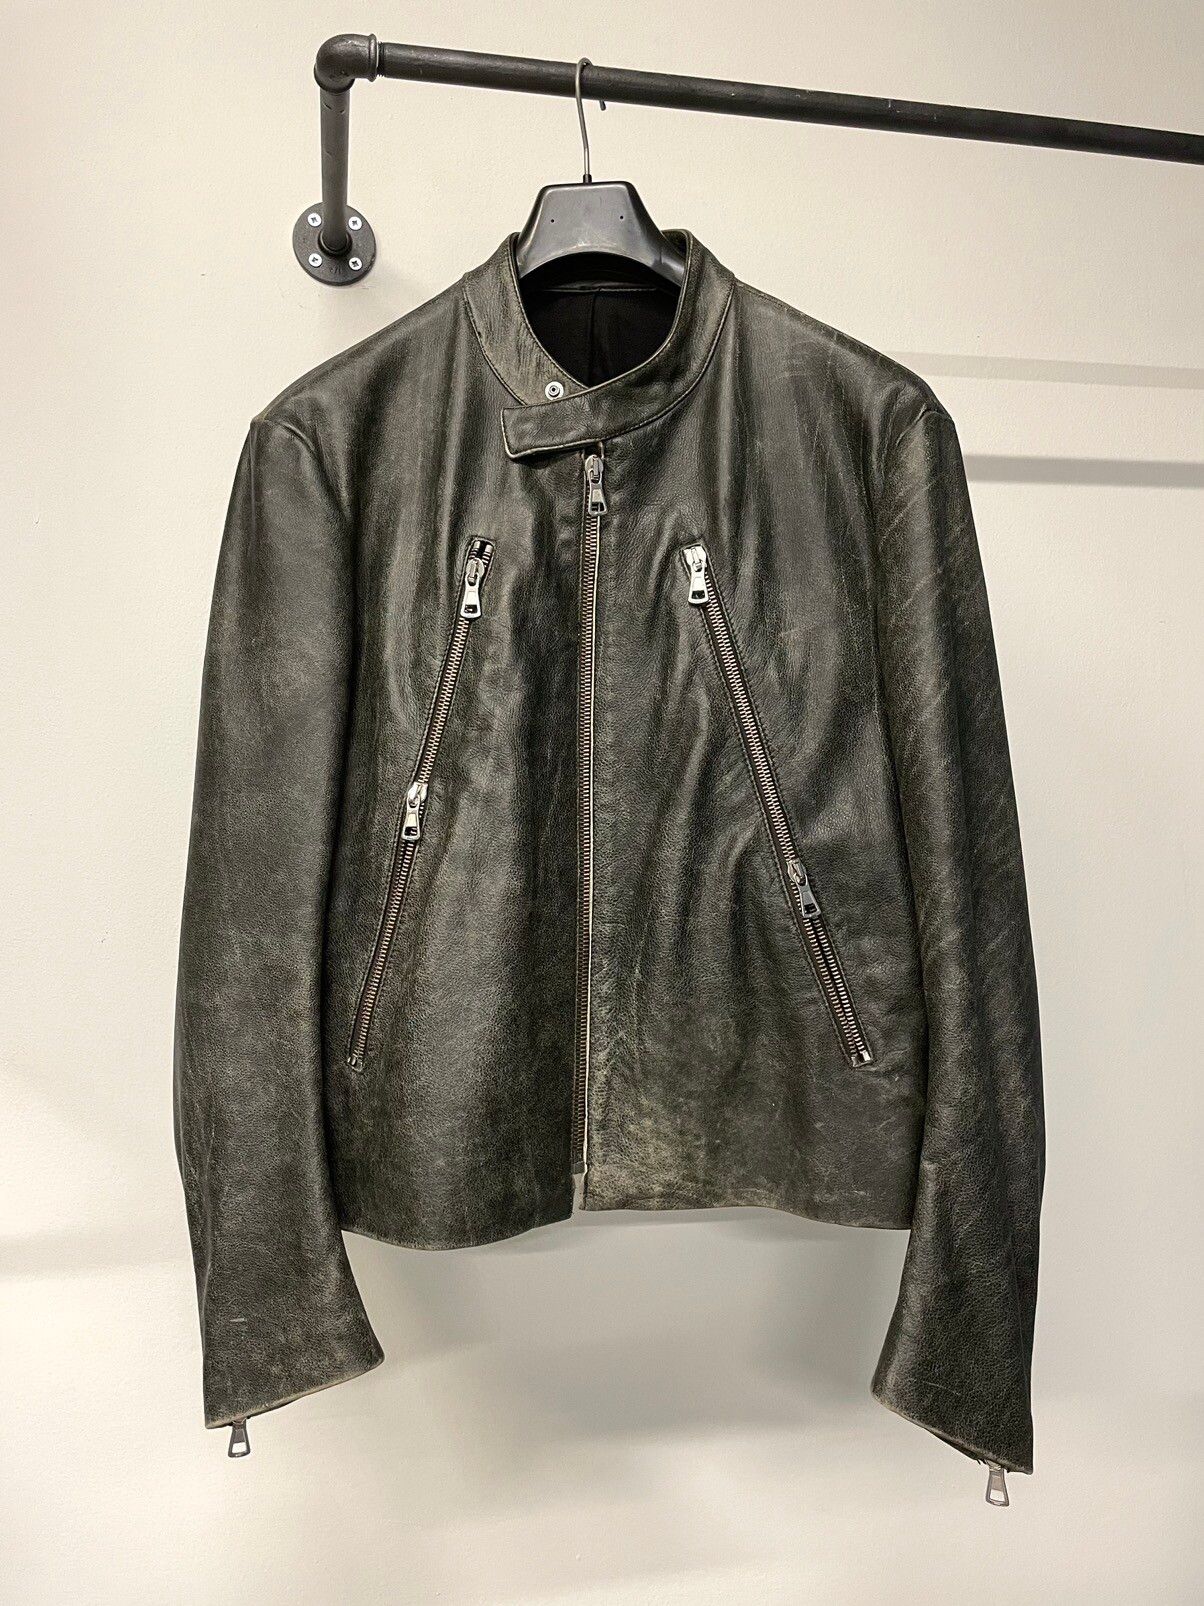 Maison Margiela 2002 5 zip distressed faded leather jacket archive ...